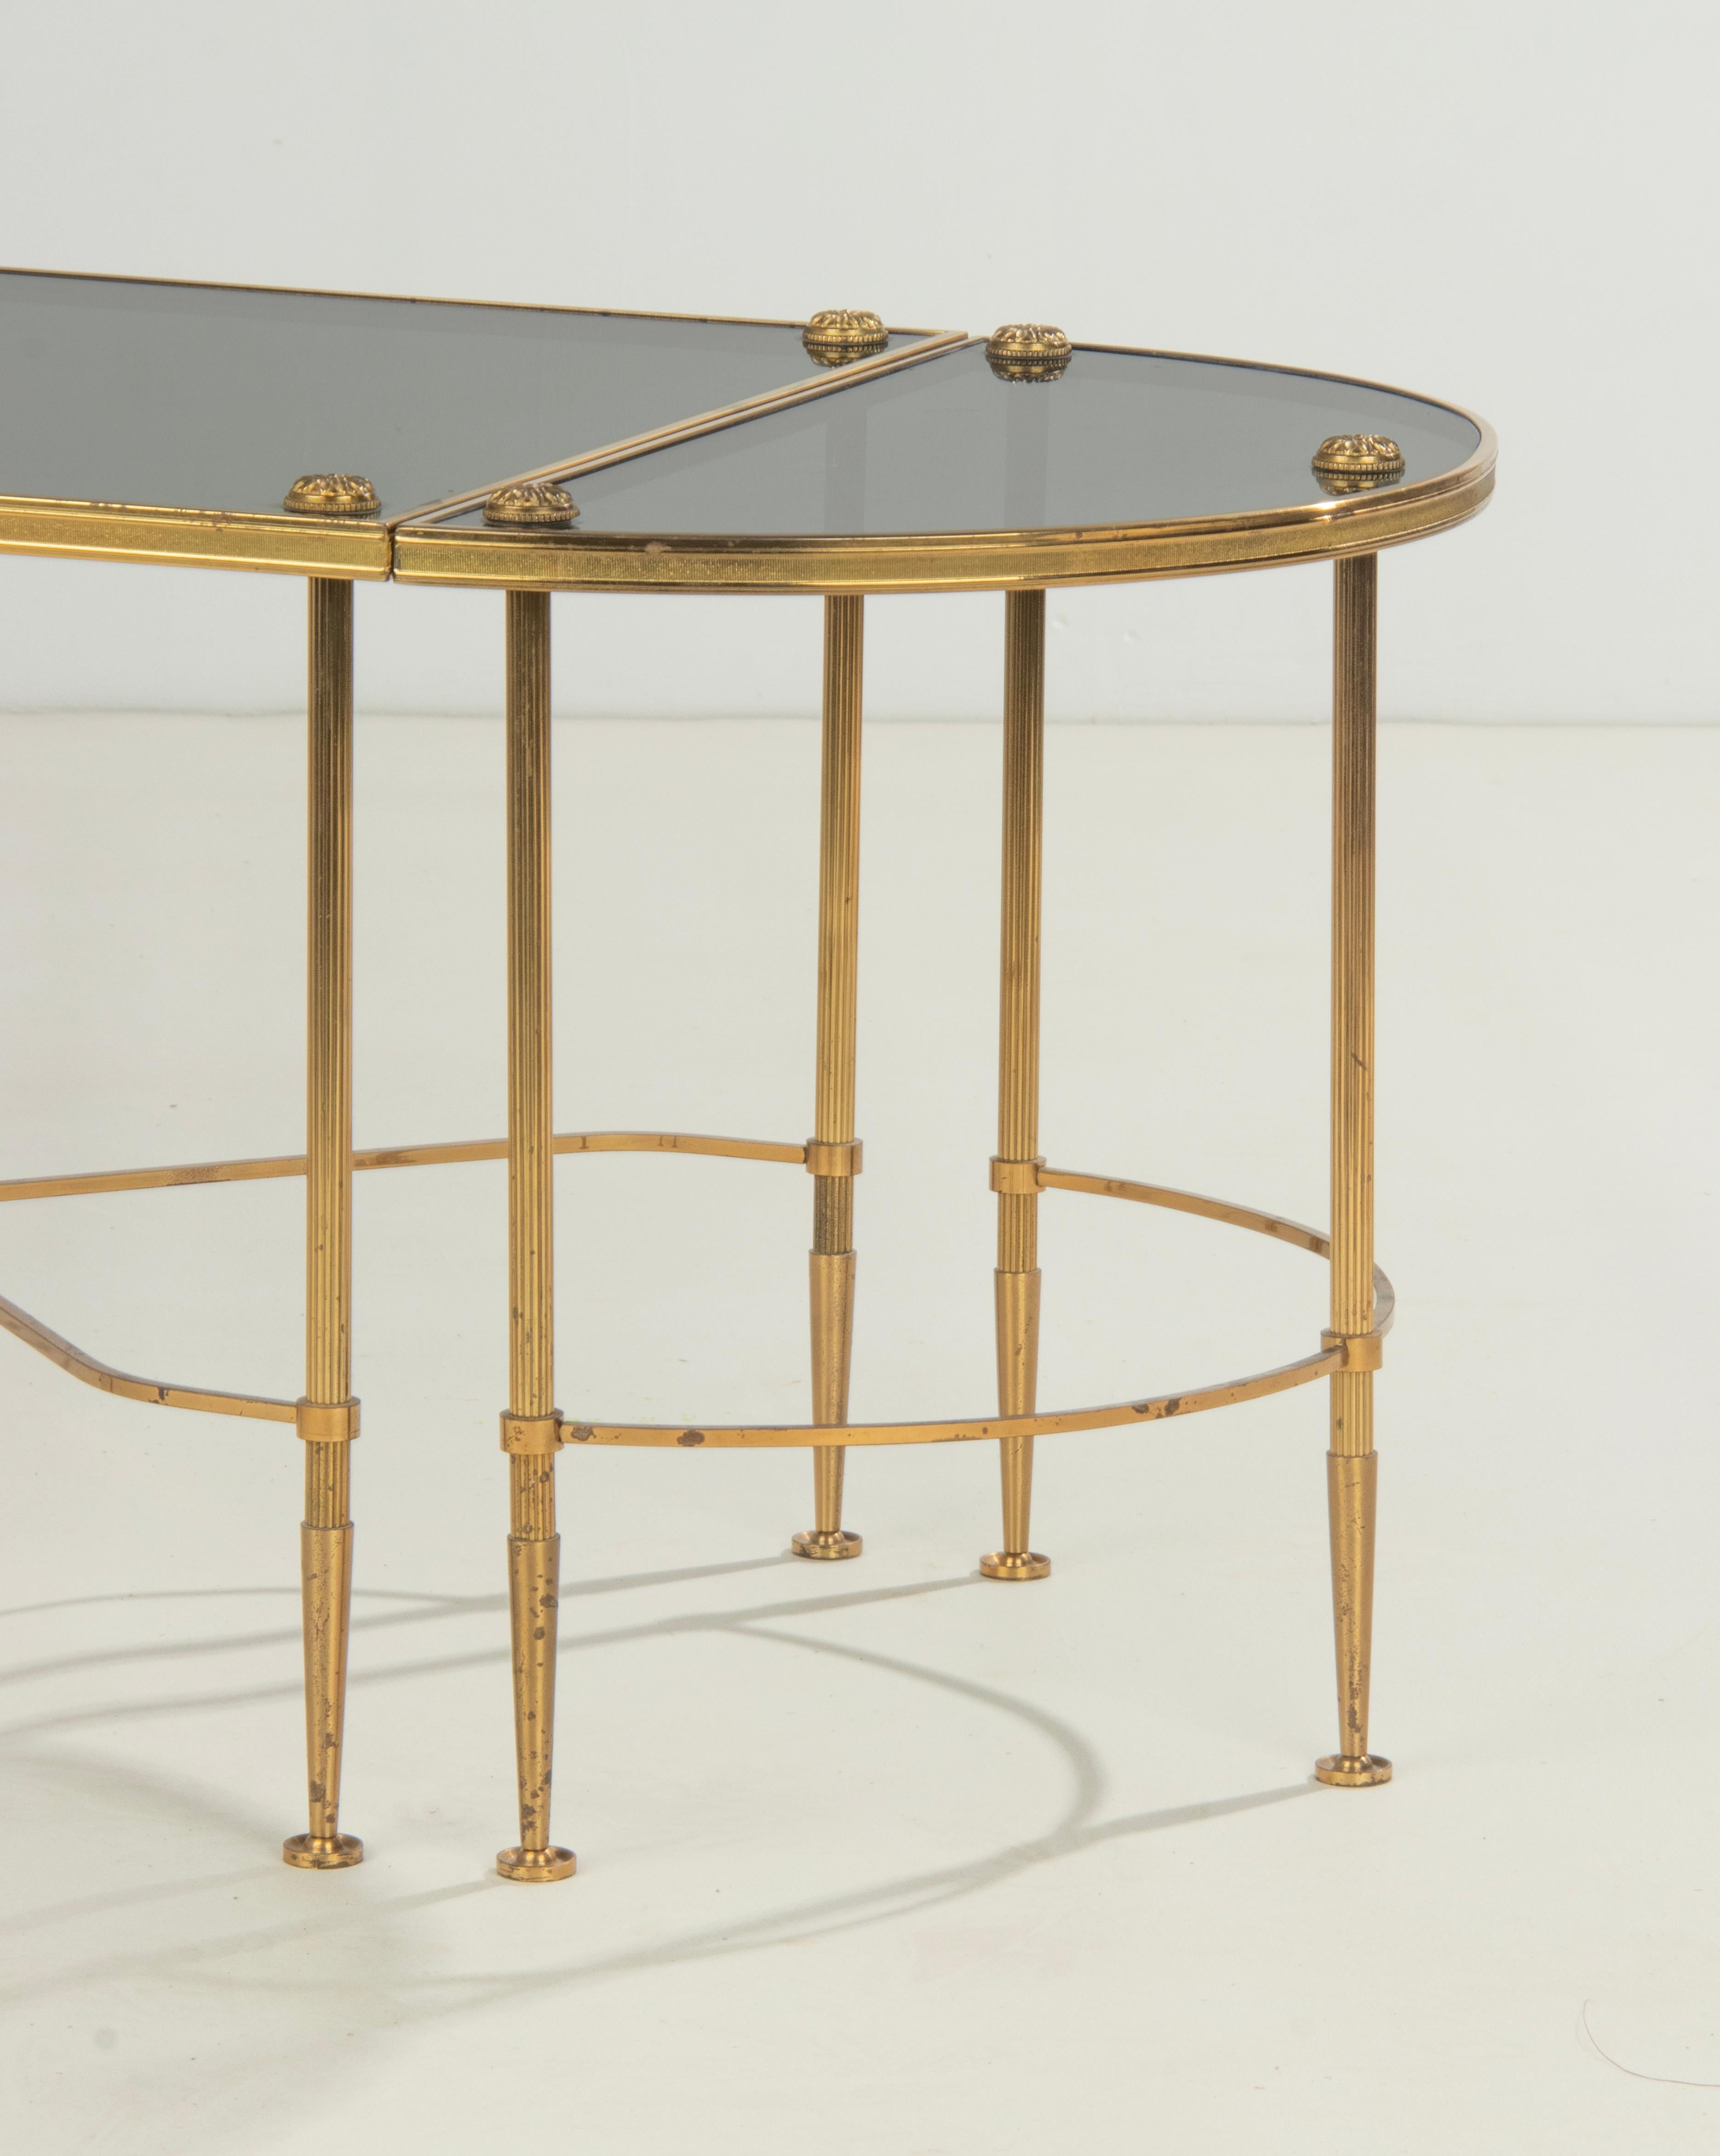 An elegant Maison Baguès style coffee table, made of polished brass colored metal, on fluted legs. Three modular elements: a central rectangular table with a x-stretcher, accompanied by two half-moons (demi lune) on both ends. On top a smoked